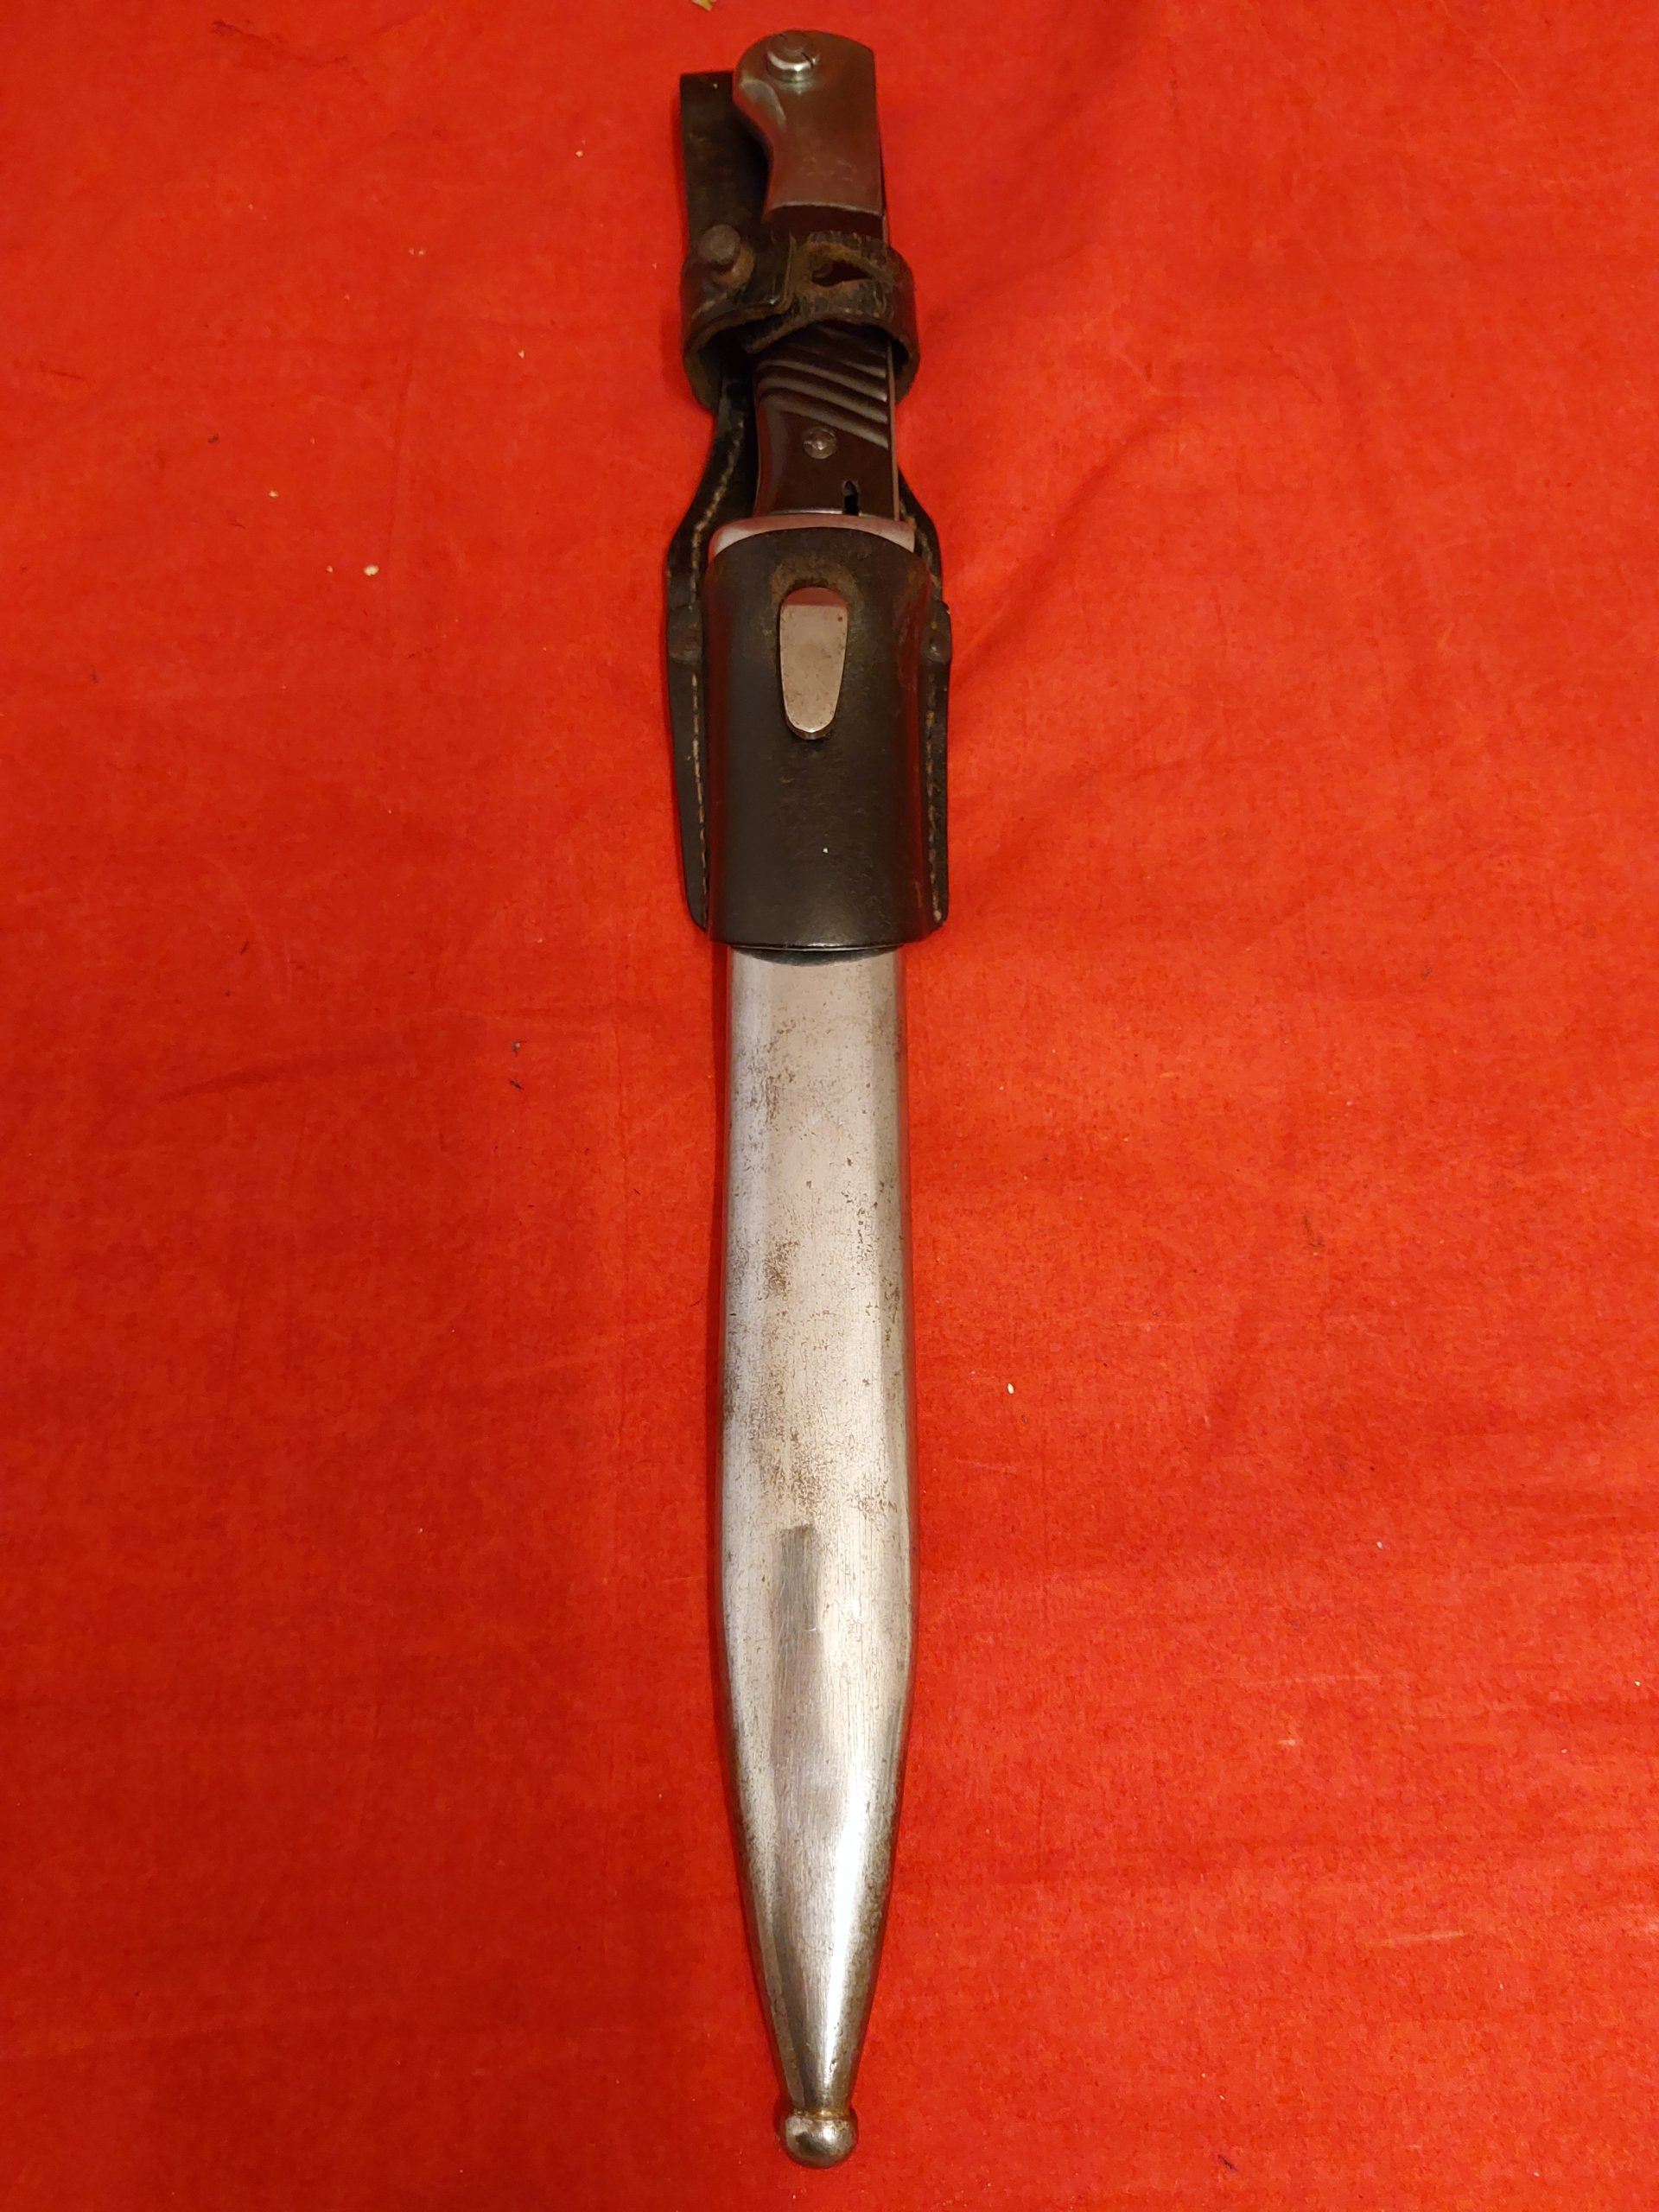 K-98 Bayonet In Steel Scabbard And Leather Frog With Matching Numbers.